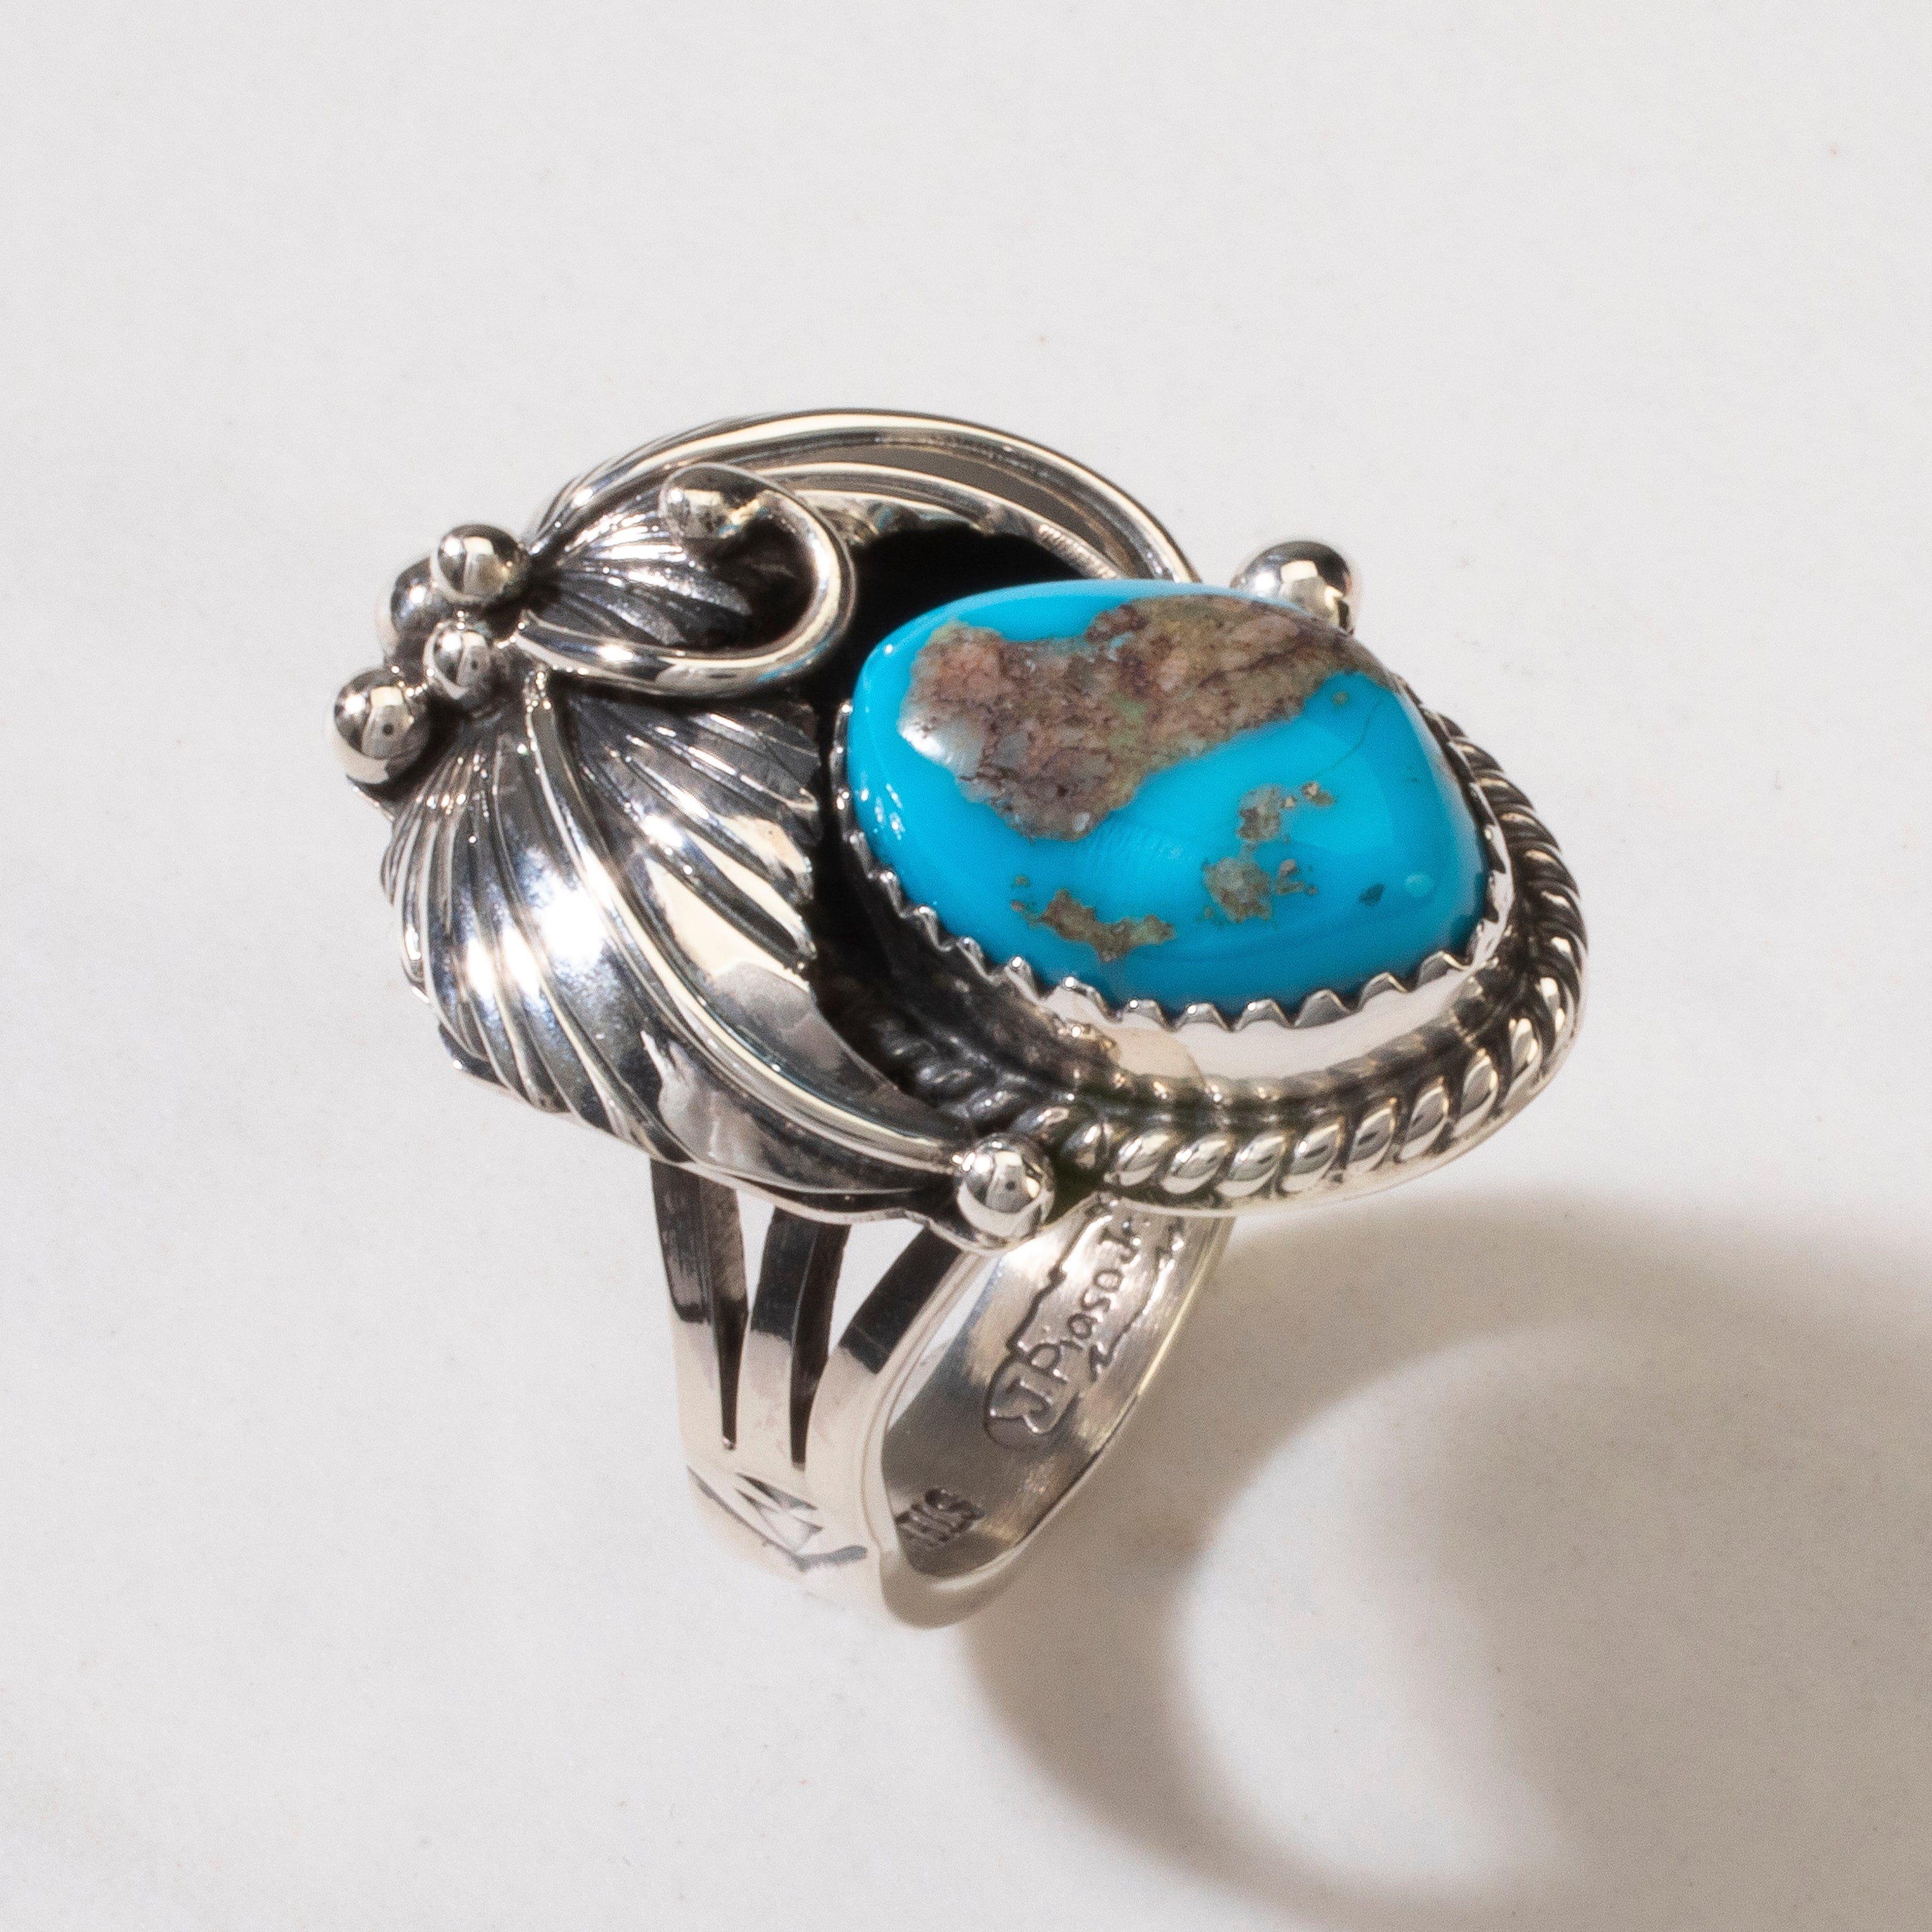 Kalifano Native American Jewelry 8 Joe Piaso Jr. Sleeping Beauty Turquoise Feather Navajo USA Native American Made 925 Sterling Silver Ring NAR600.080.8